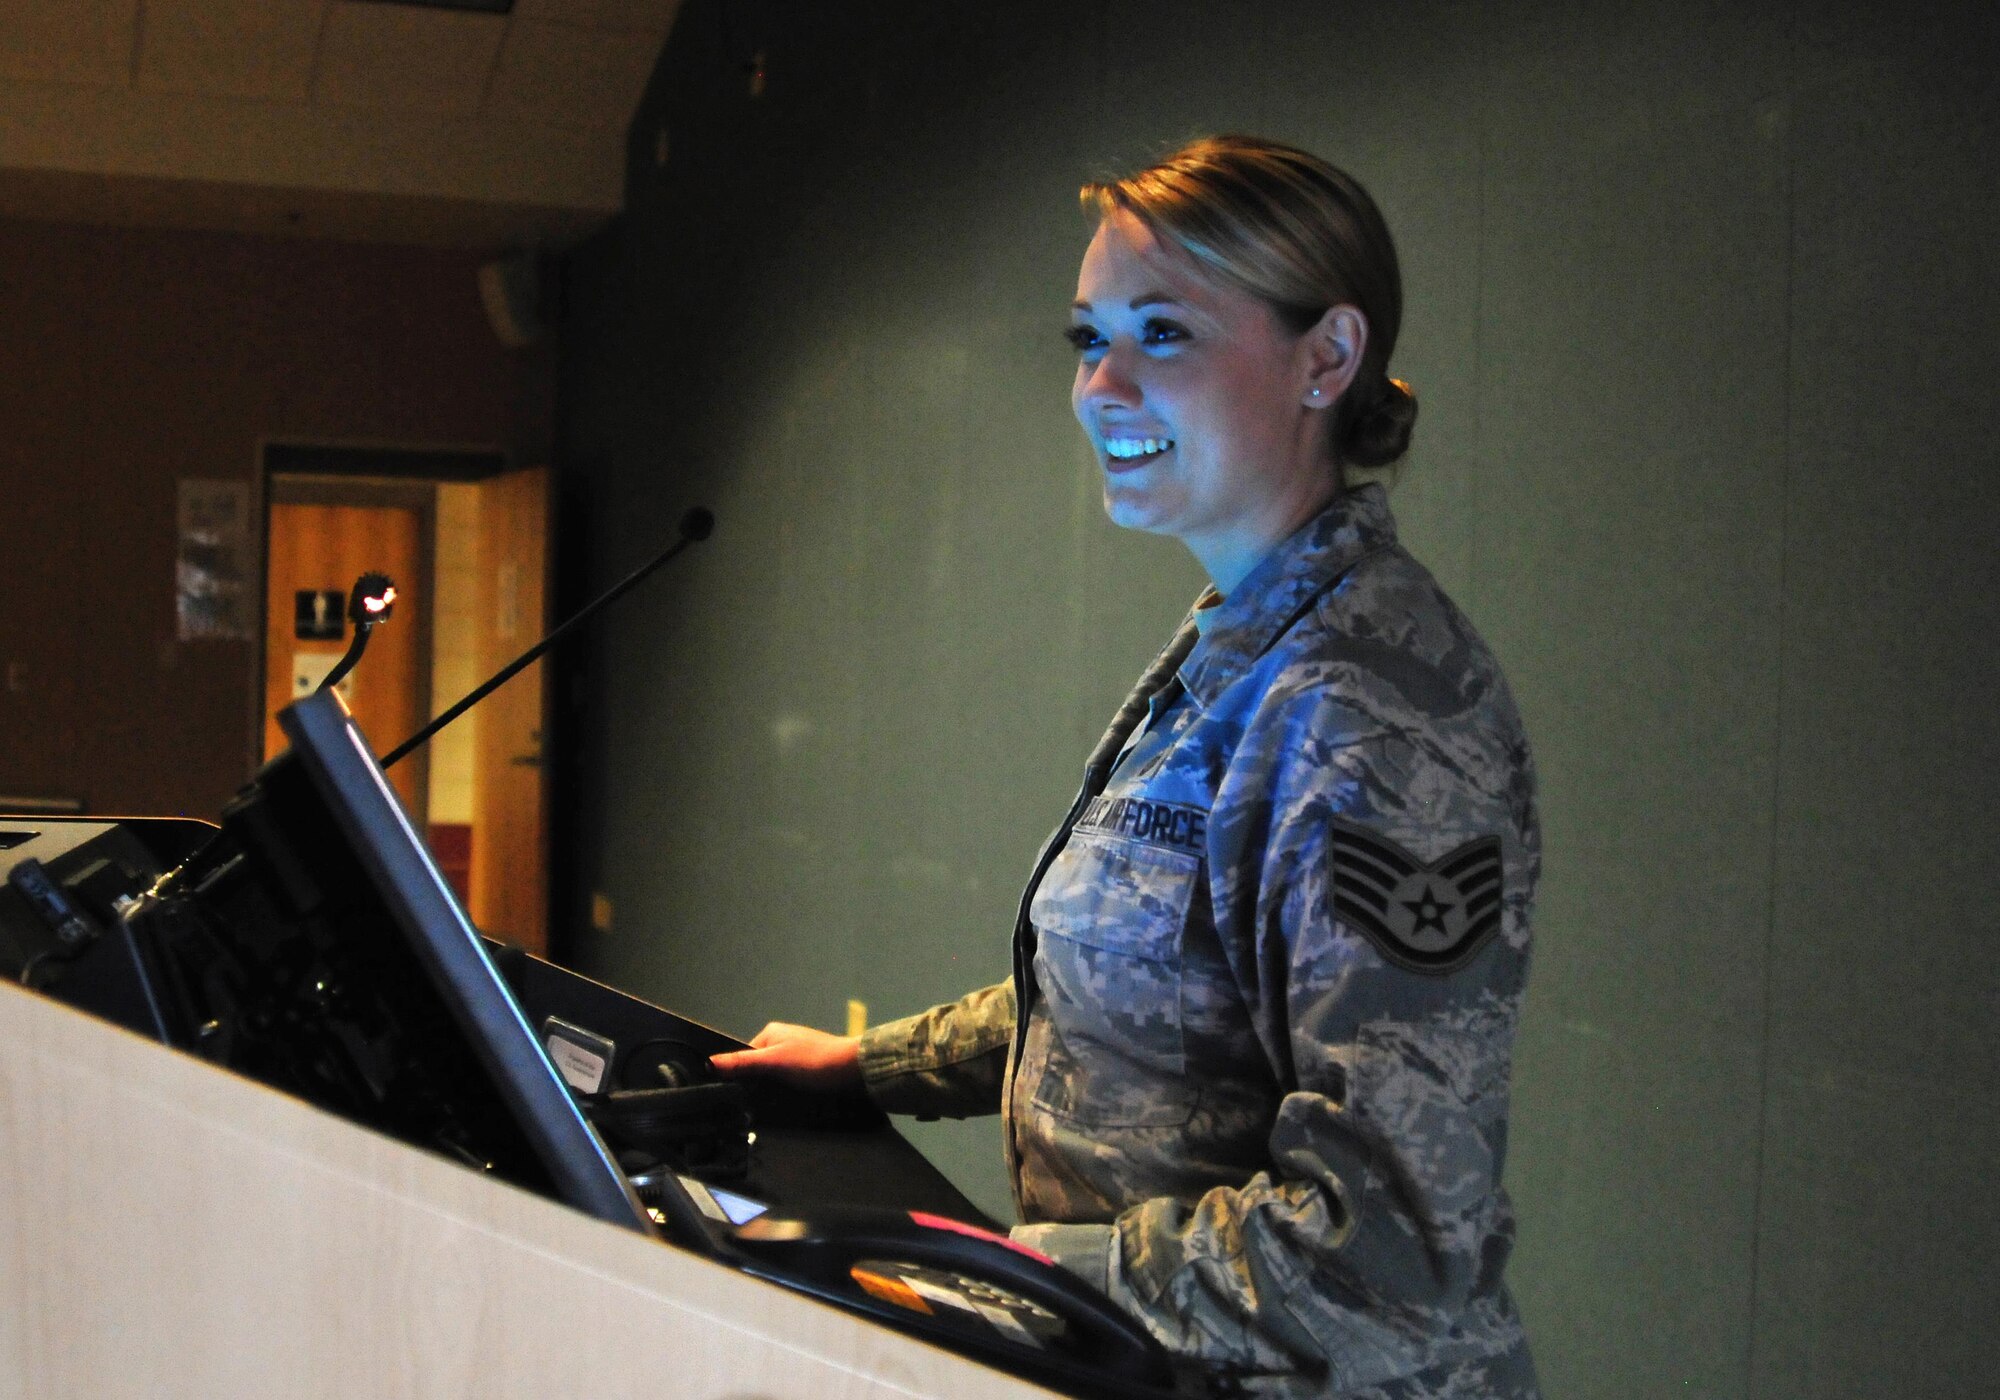 Staff Sgt. Jennifer D. Masters, of the 178th Wing, Ohio Air National Guard, gives a mission brief at Springfield Air National Guard Base in Springfield, Ohio, May 14, 2016. Masters was selected as the ANG's 2016 Outstanding Airman of the Year. (Air National Guard photo/Airman 1st Class Rachel Simones)